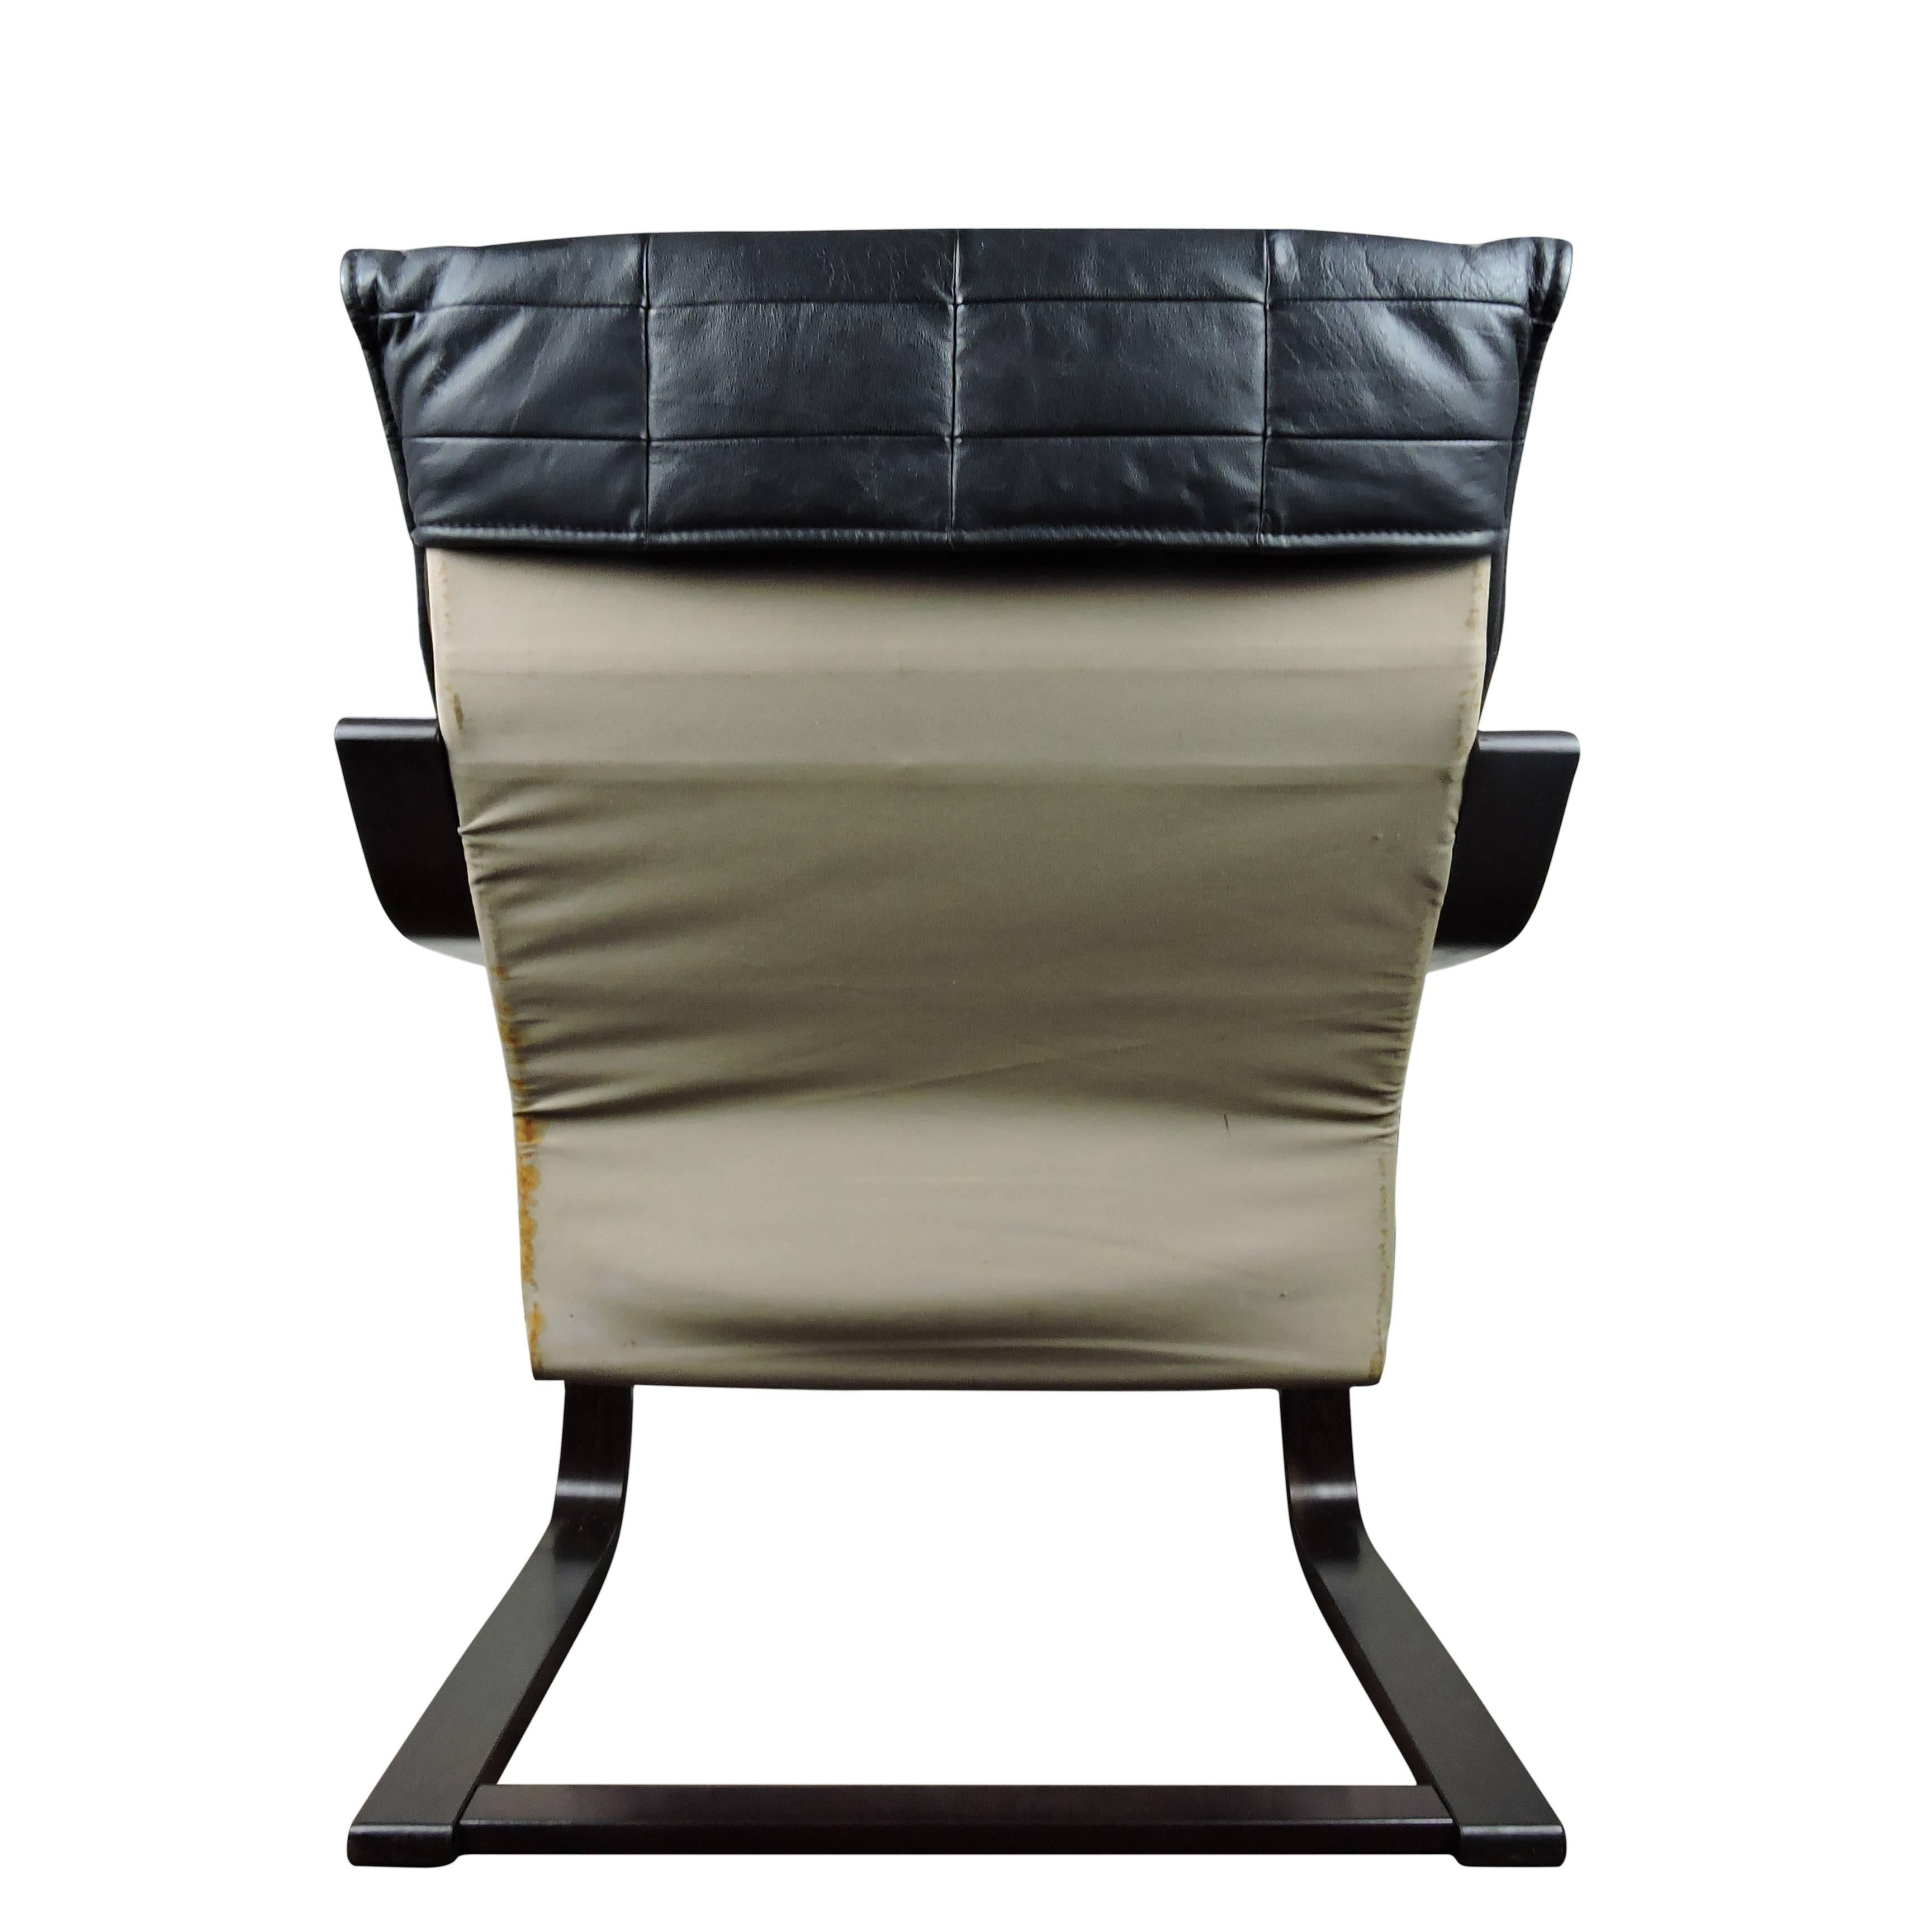 A Danish cantilever chair with stained pre-formed laminate frame featuring a black leather seat covering.